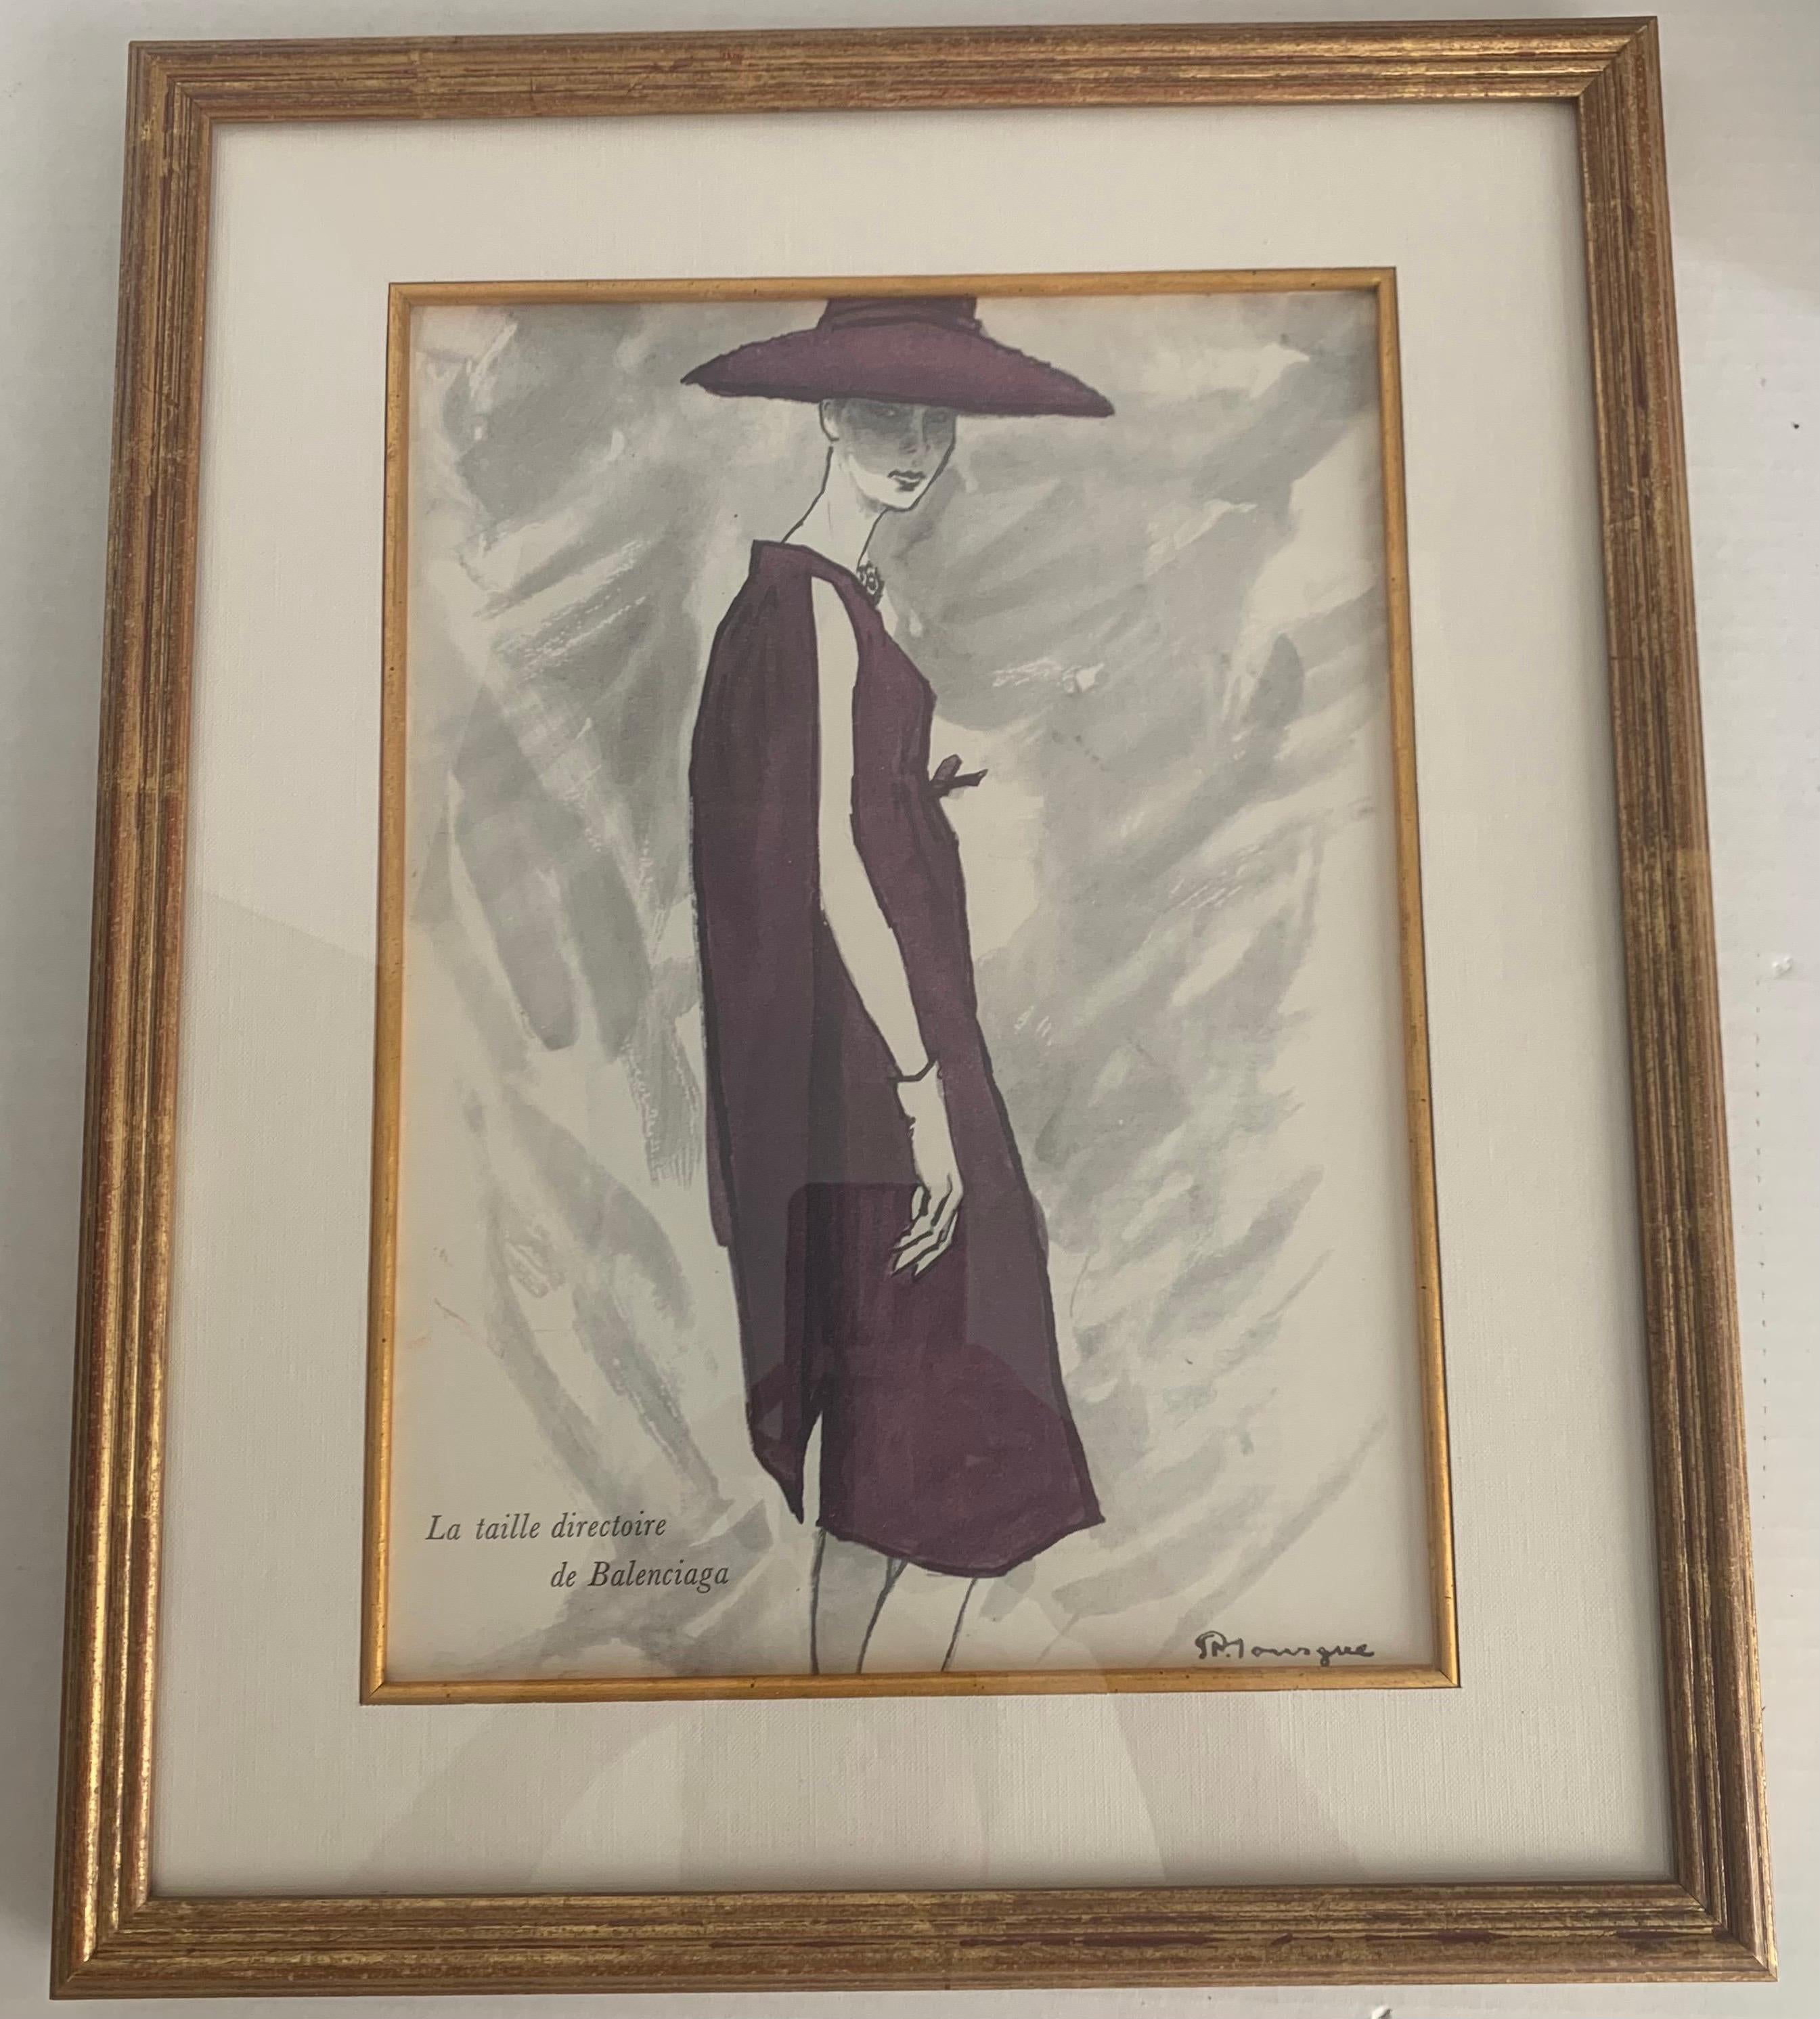 1958 fashion illustration of Balenciaga purple cocoon dress and hat print by Pierre Mourgue. Linen backed print. Professionally framed in carved gilt-wood frame.